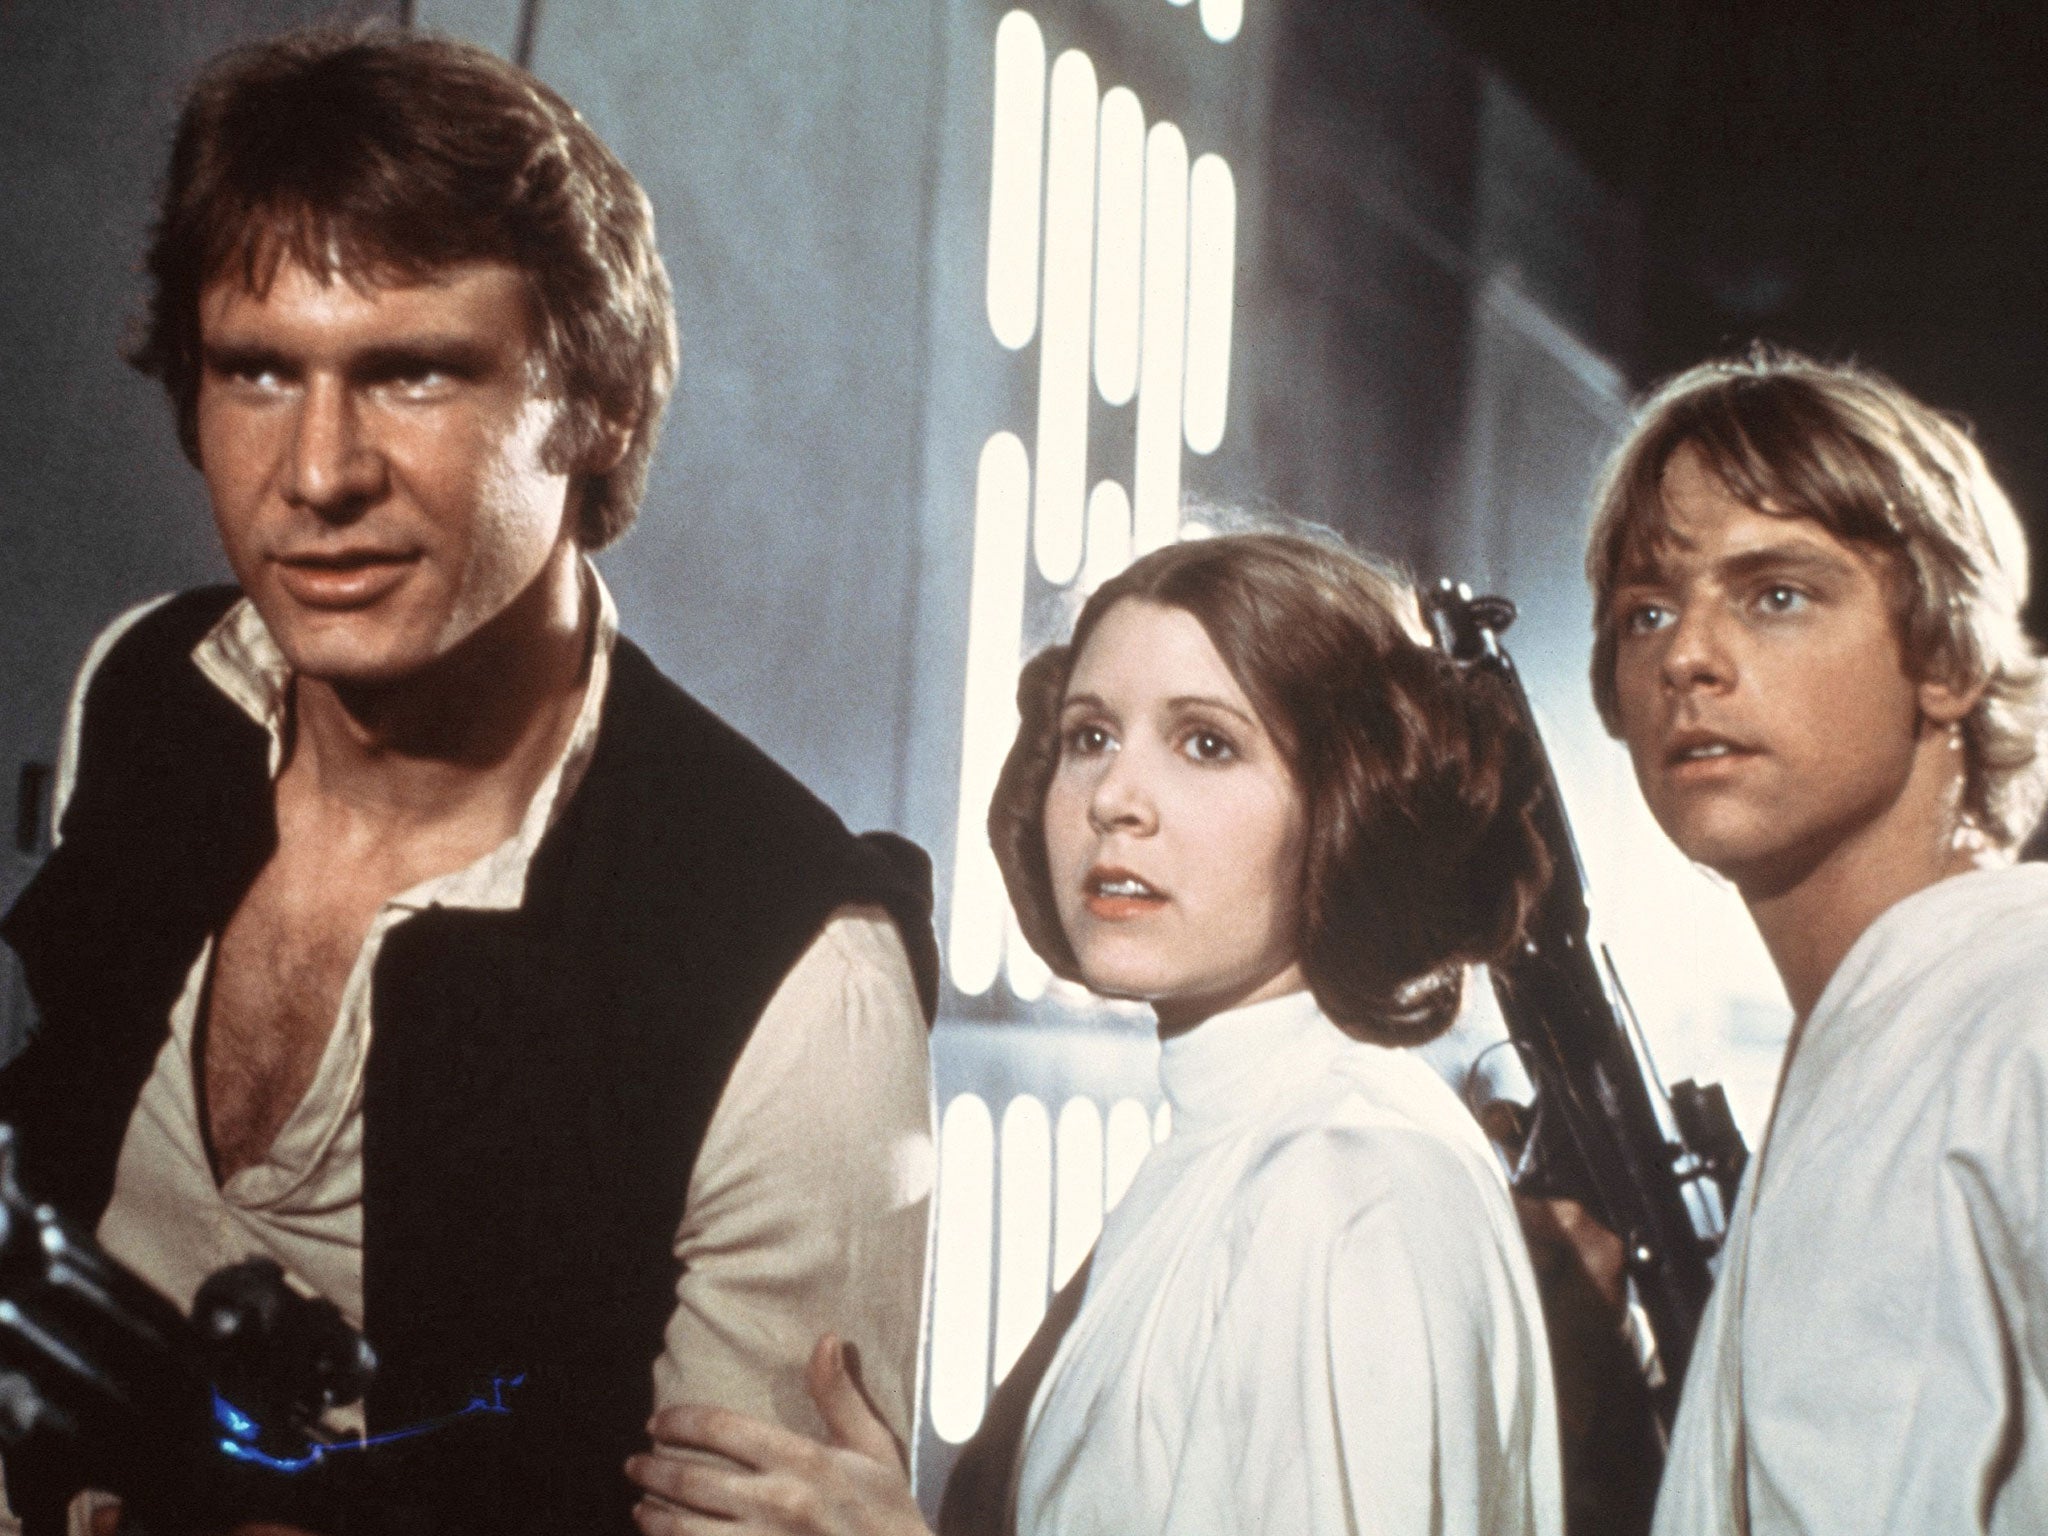 Carrie Fisher, centre, is returning to her iconic role as Princess Leia